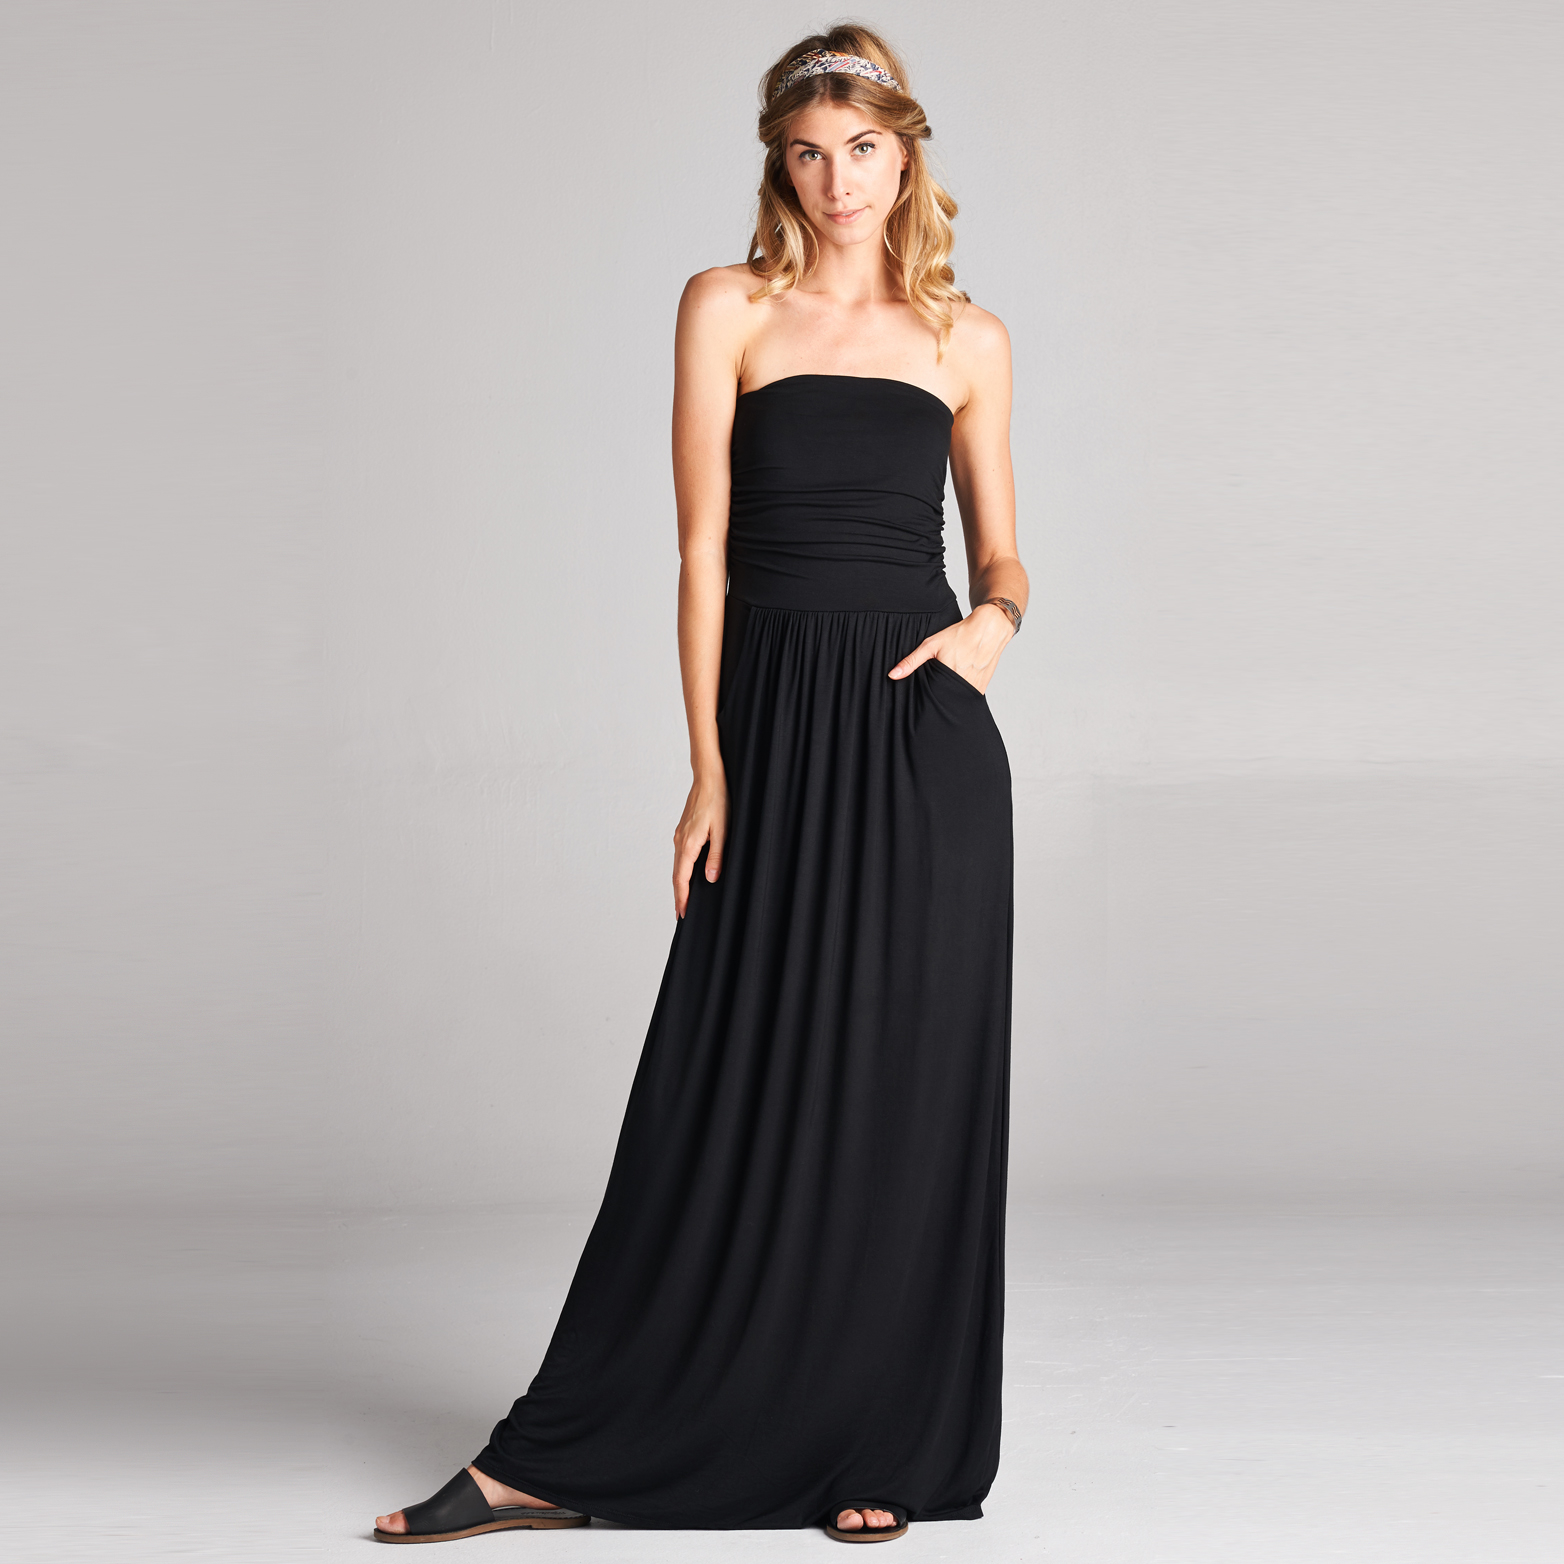 Atlantis Strapless Maxi Dress With Pockets In 6 Colors - Black, Small (4-6)